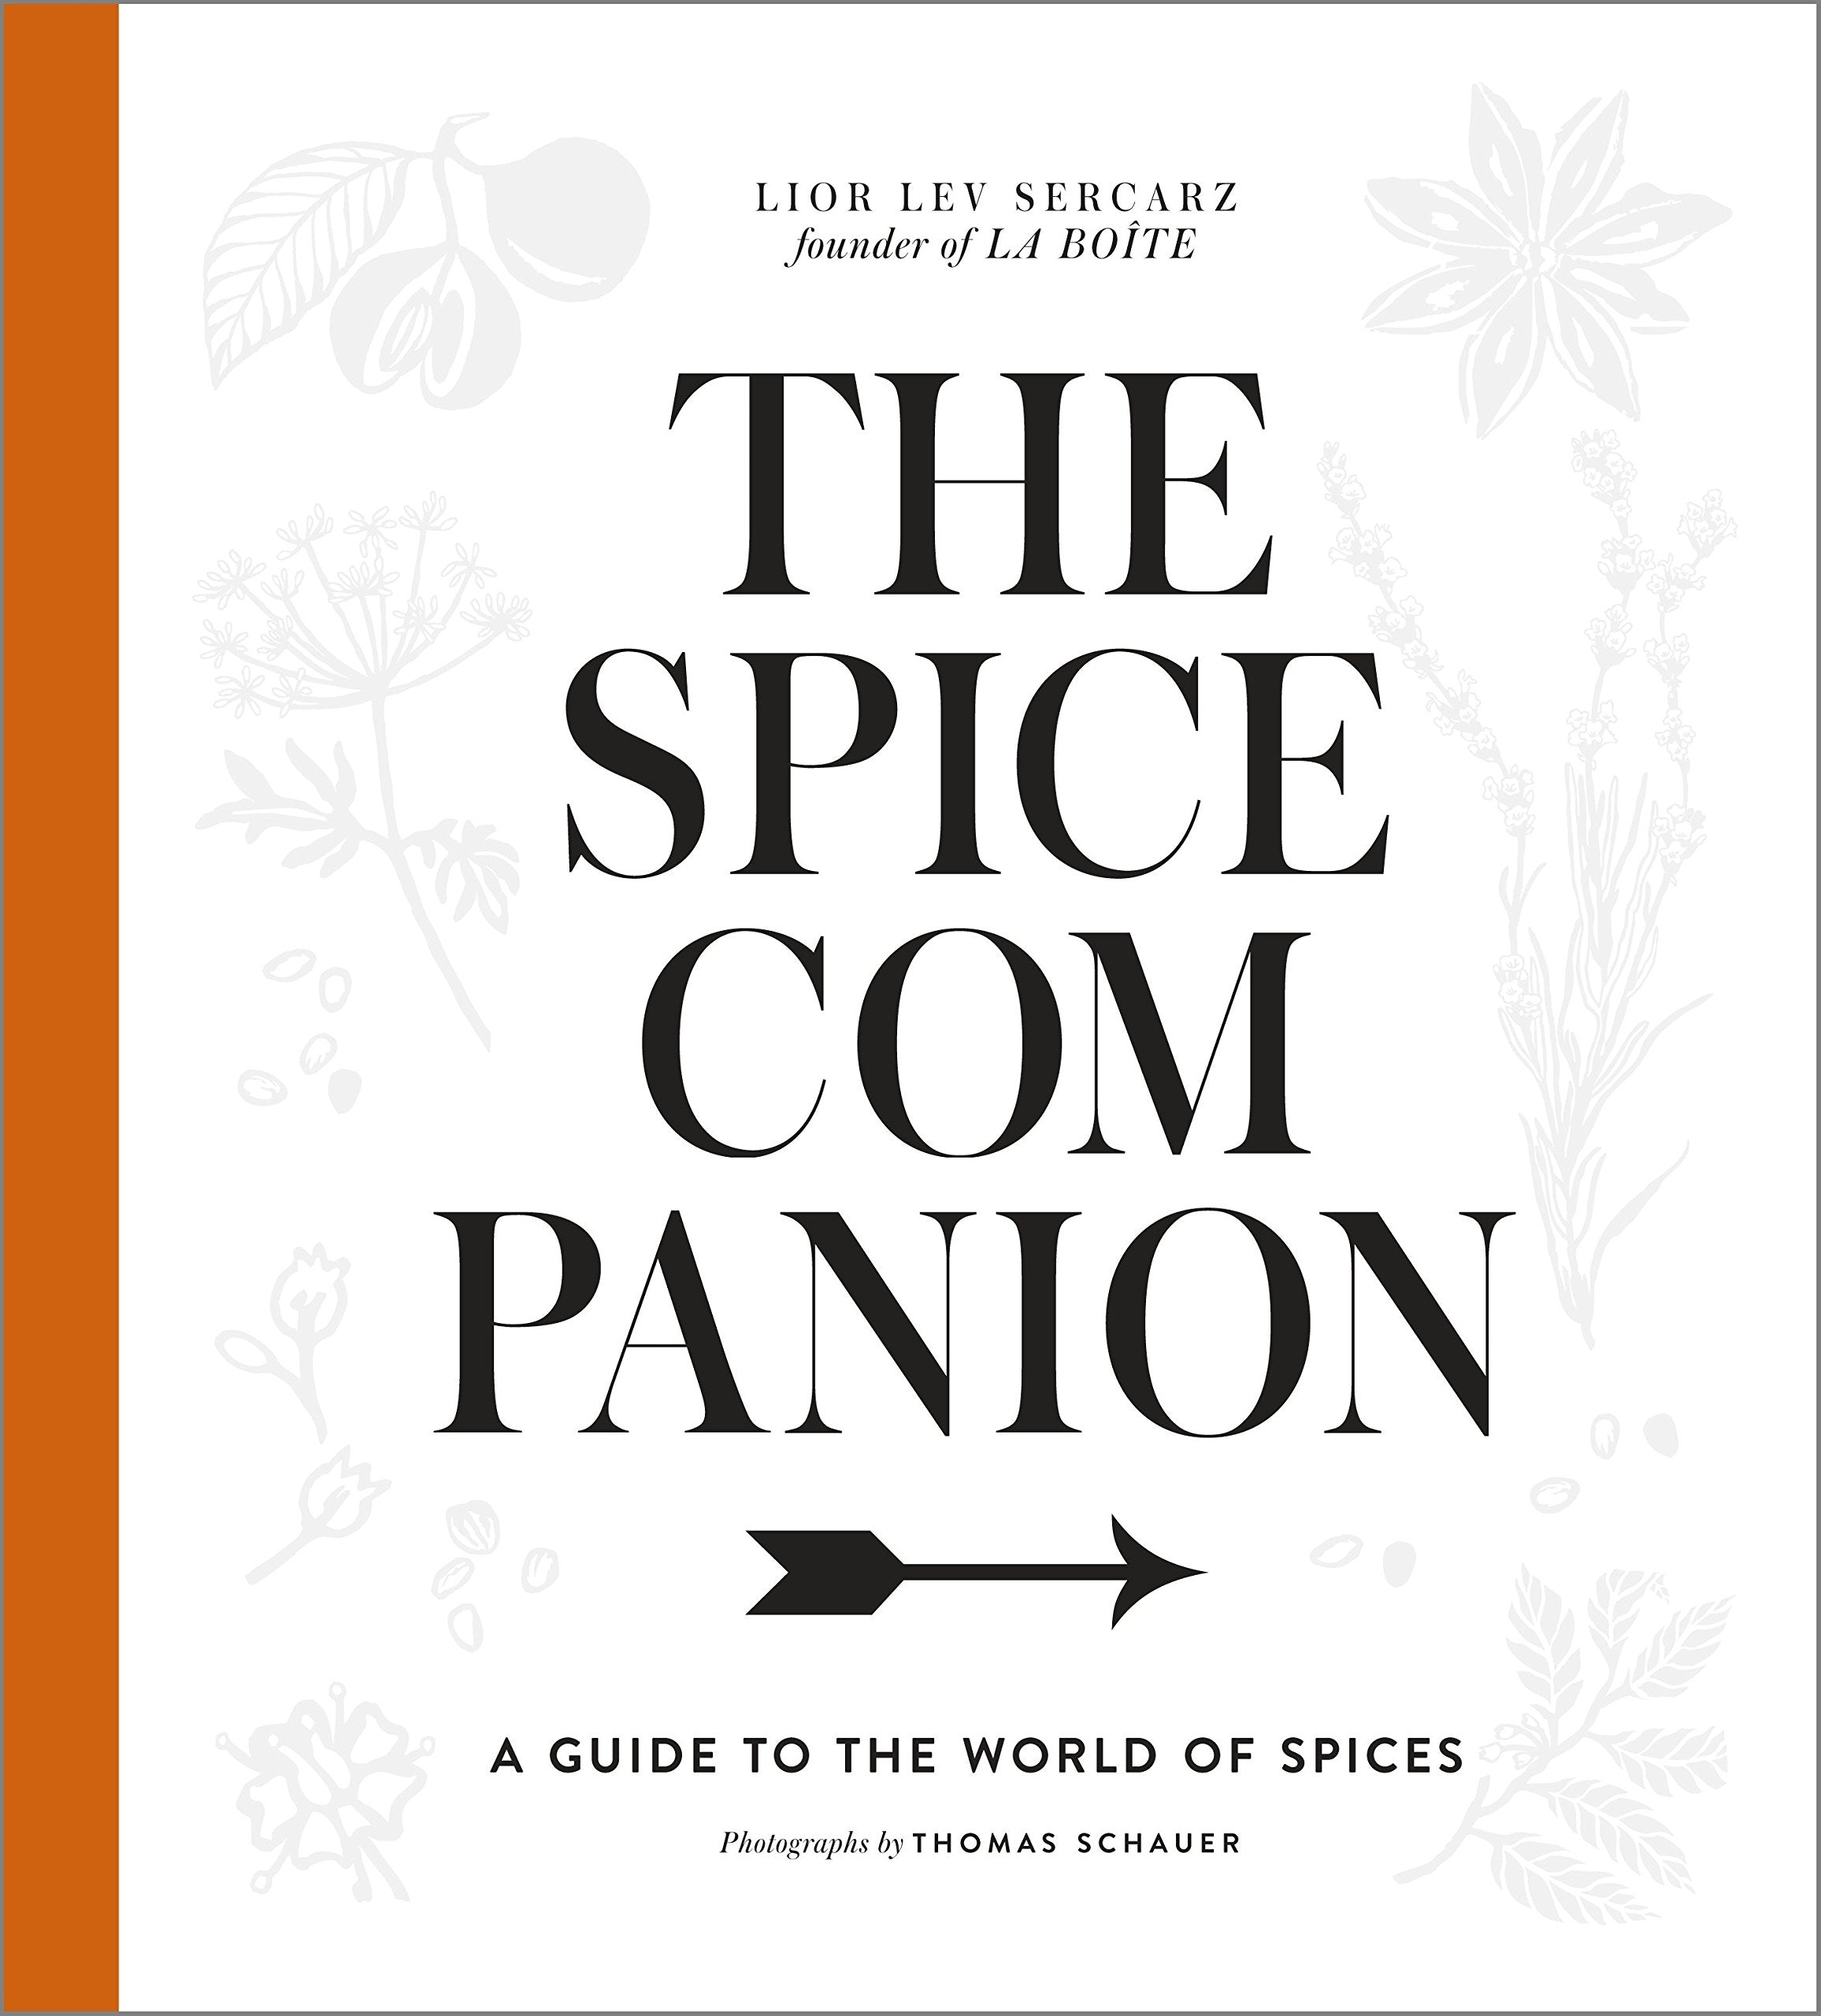 The Spice Companion: A Guide to the World of Spices *SIGNED!* (Lior Lev Sercarz)